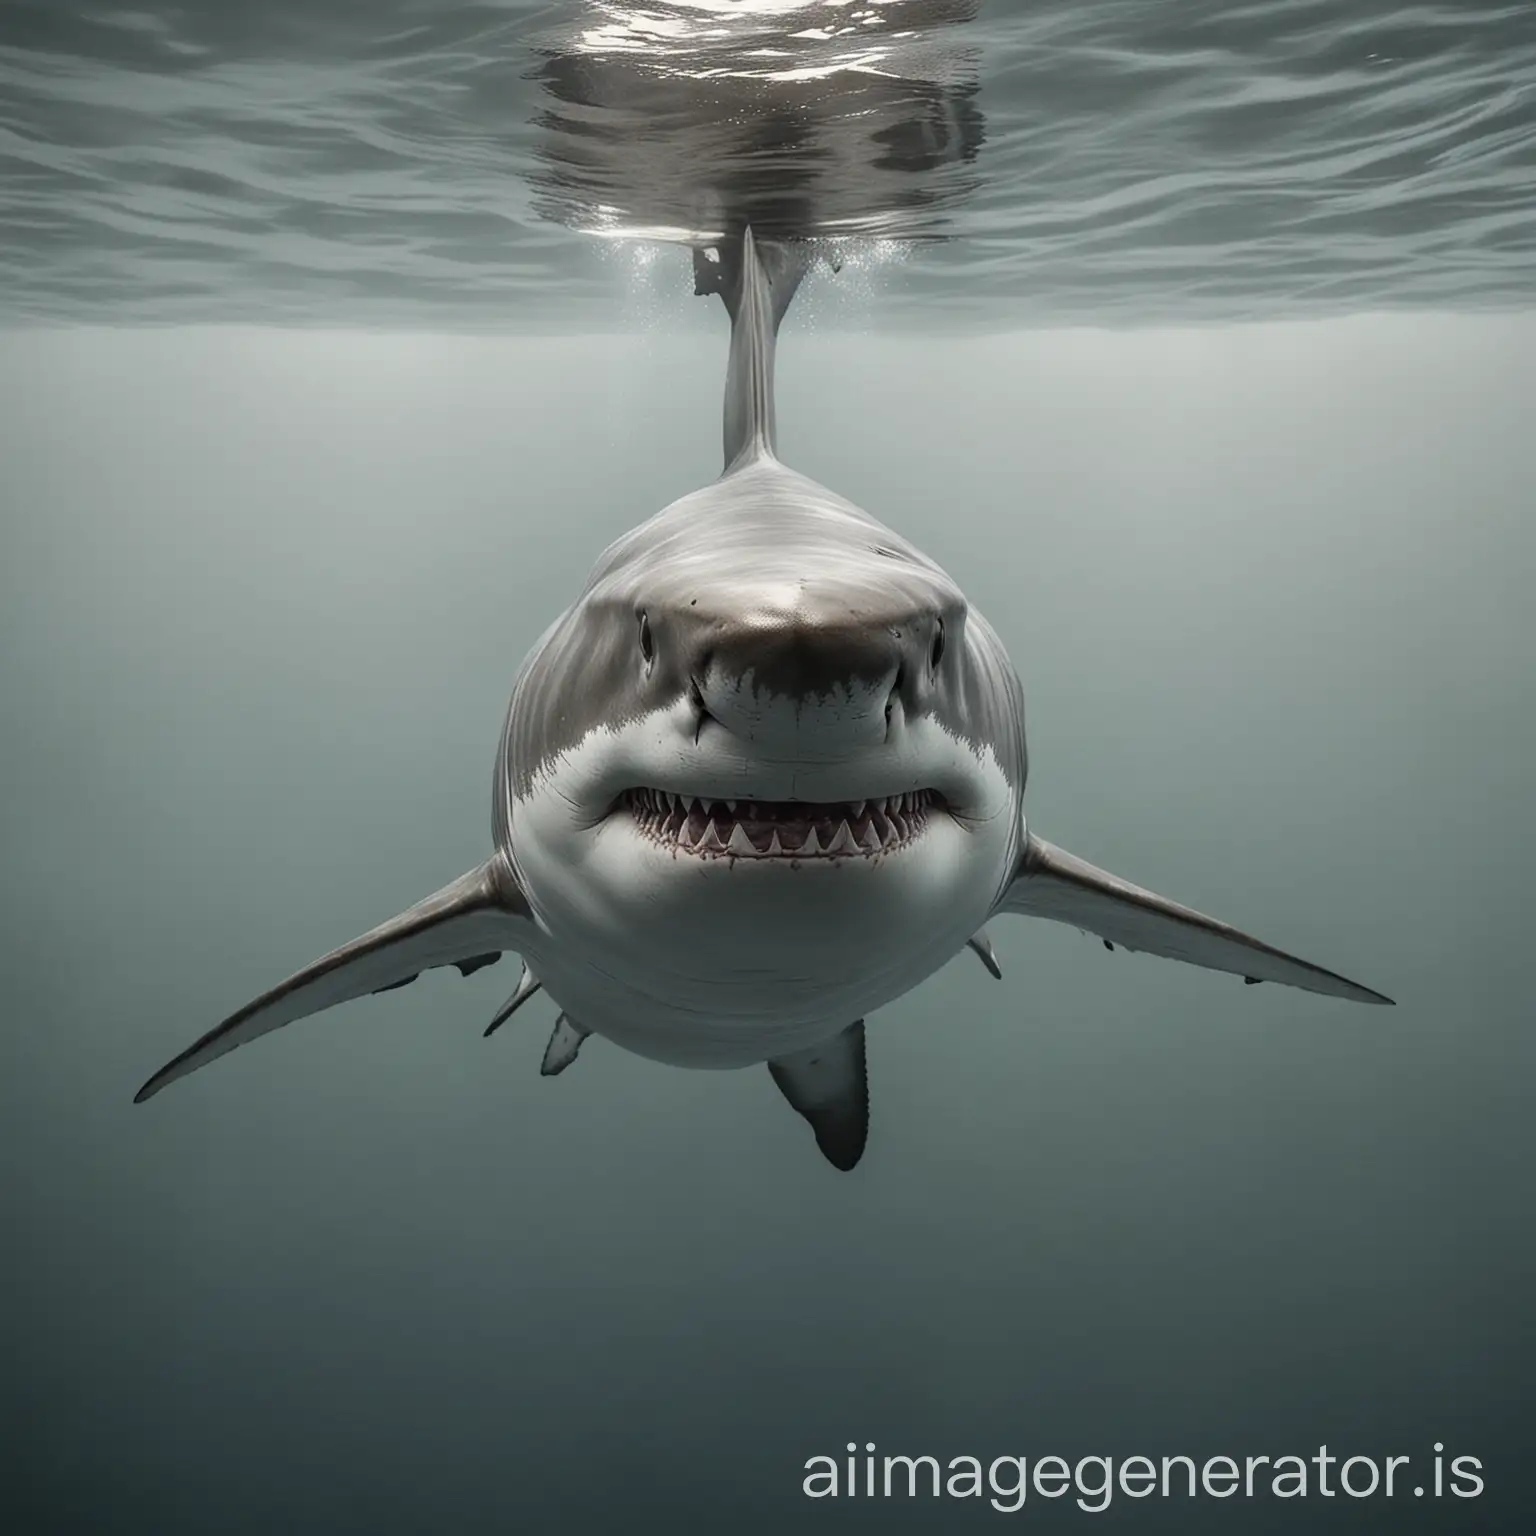 realistic great white shark full body, under water, the water looks half full, neutral background.